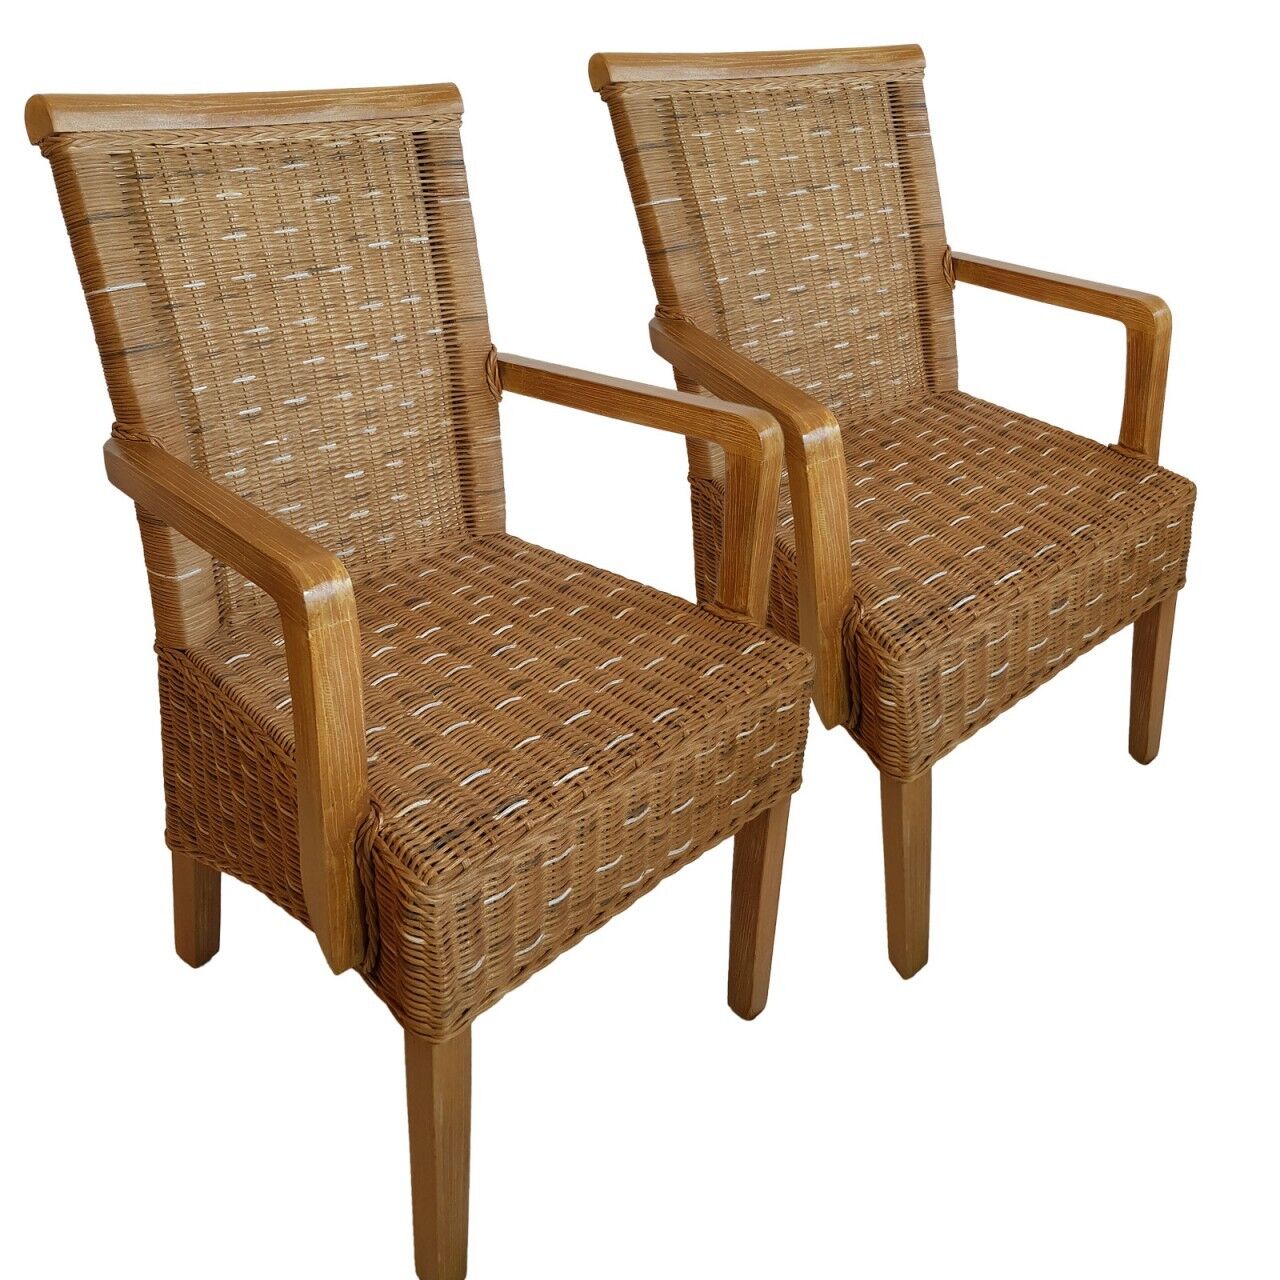 buy wholesale dining room chairs set with armrests 2 piece rattan